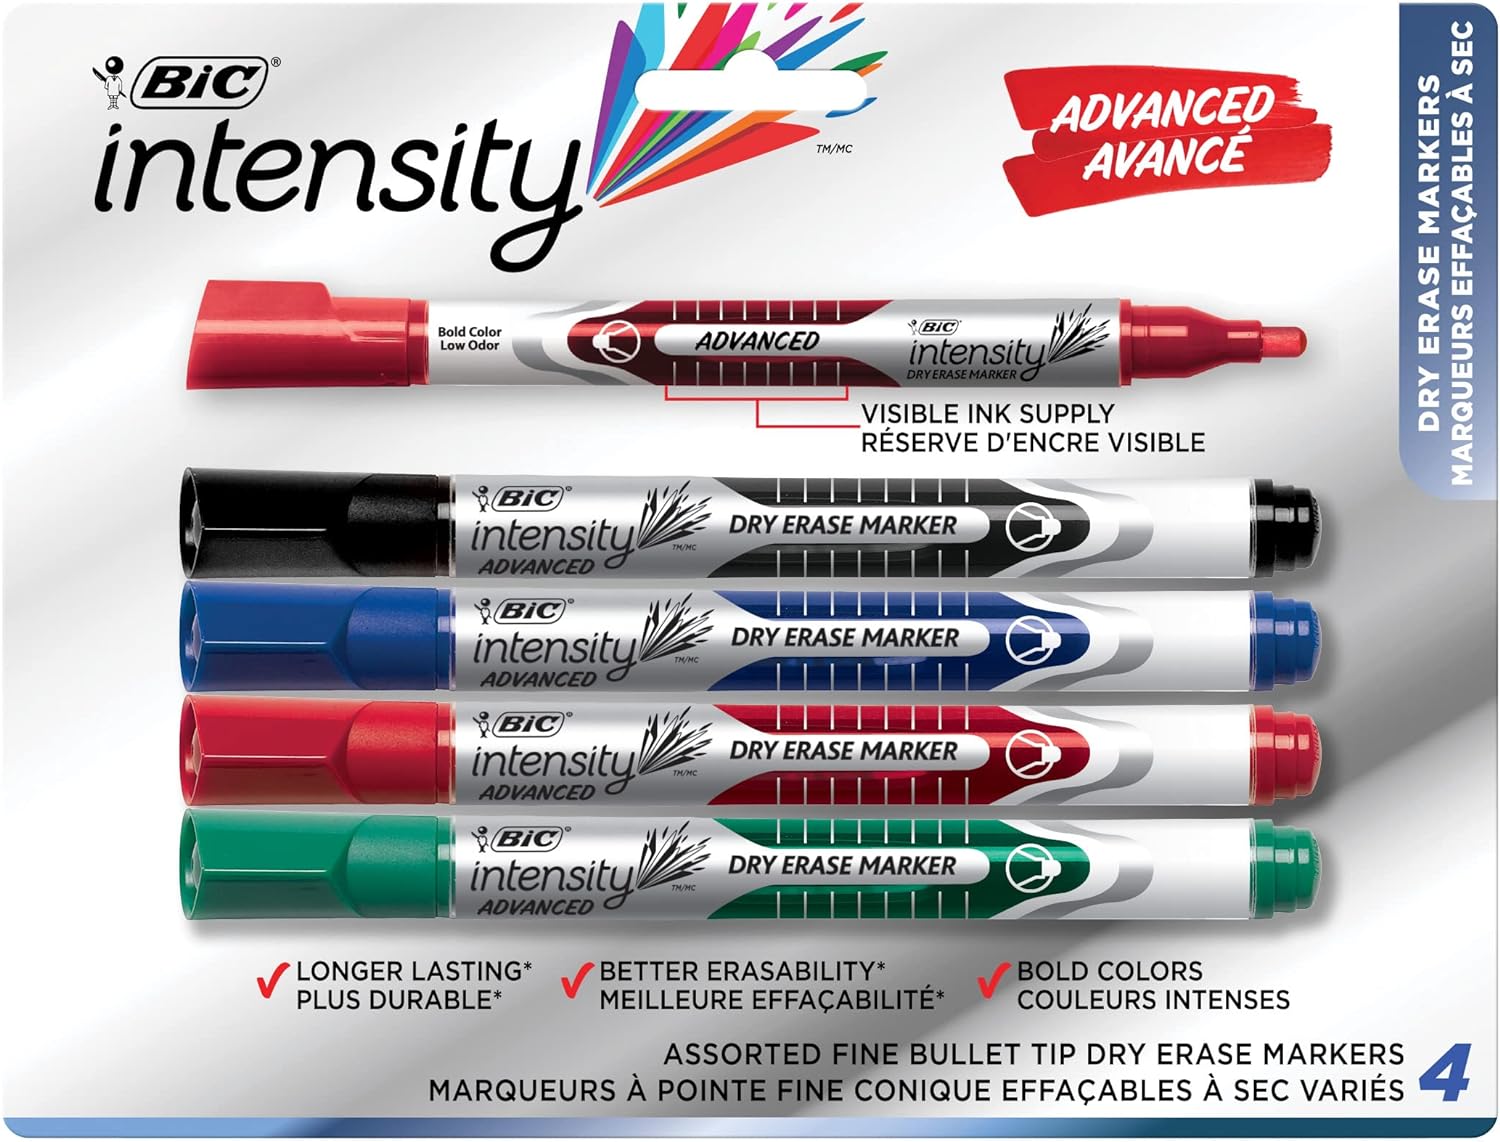 It' so nice to not smudge while writing on my dry erase board. The best markers I've used. Colors are vibrant, they erase easily and don't smear.